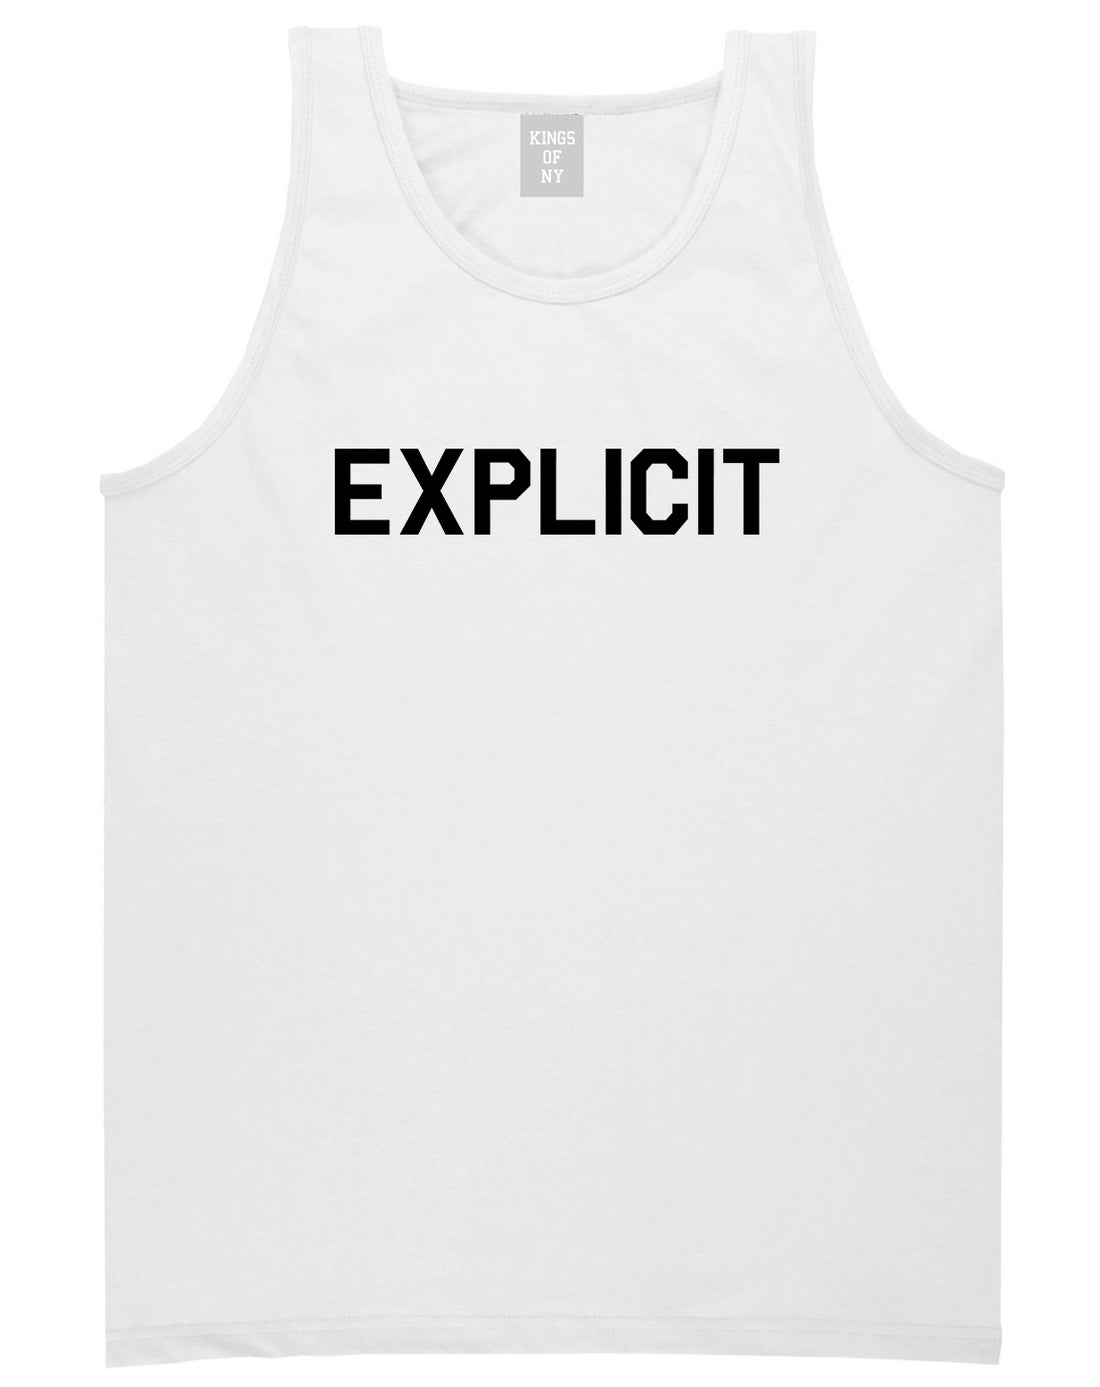 Explicit Mens Tank Top Shirt White by Kings Of NY